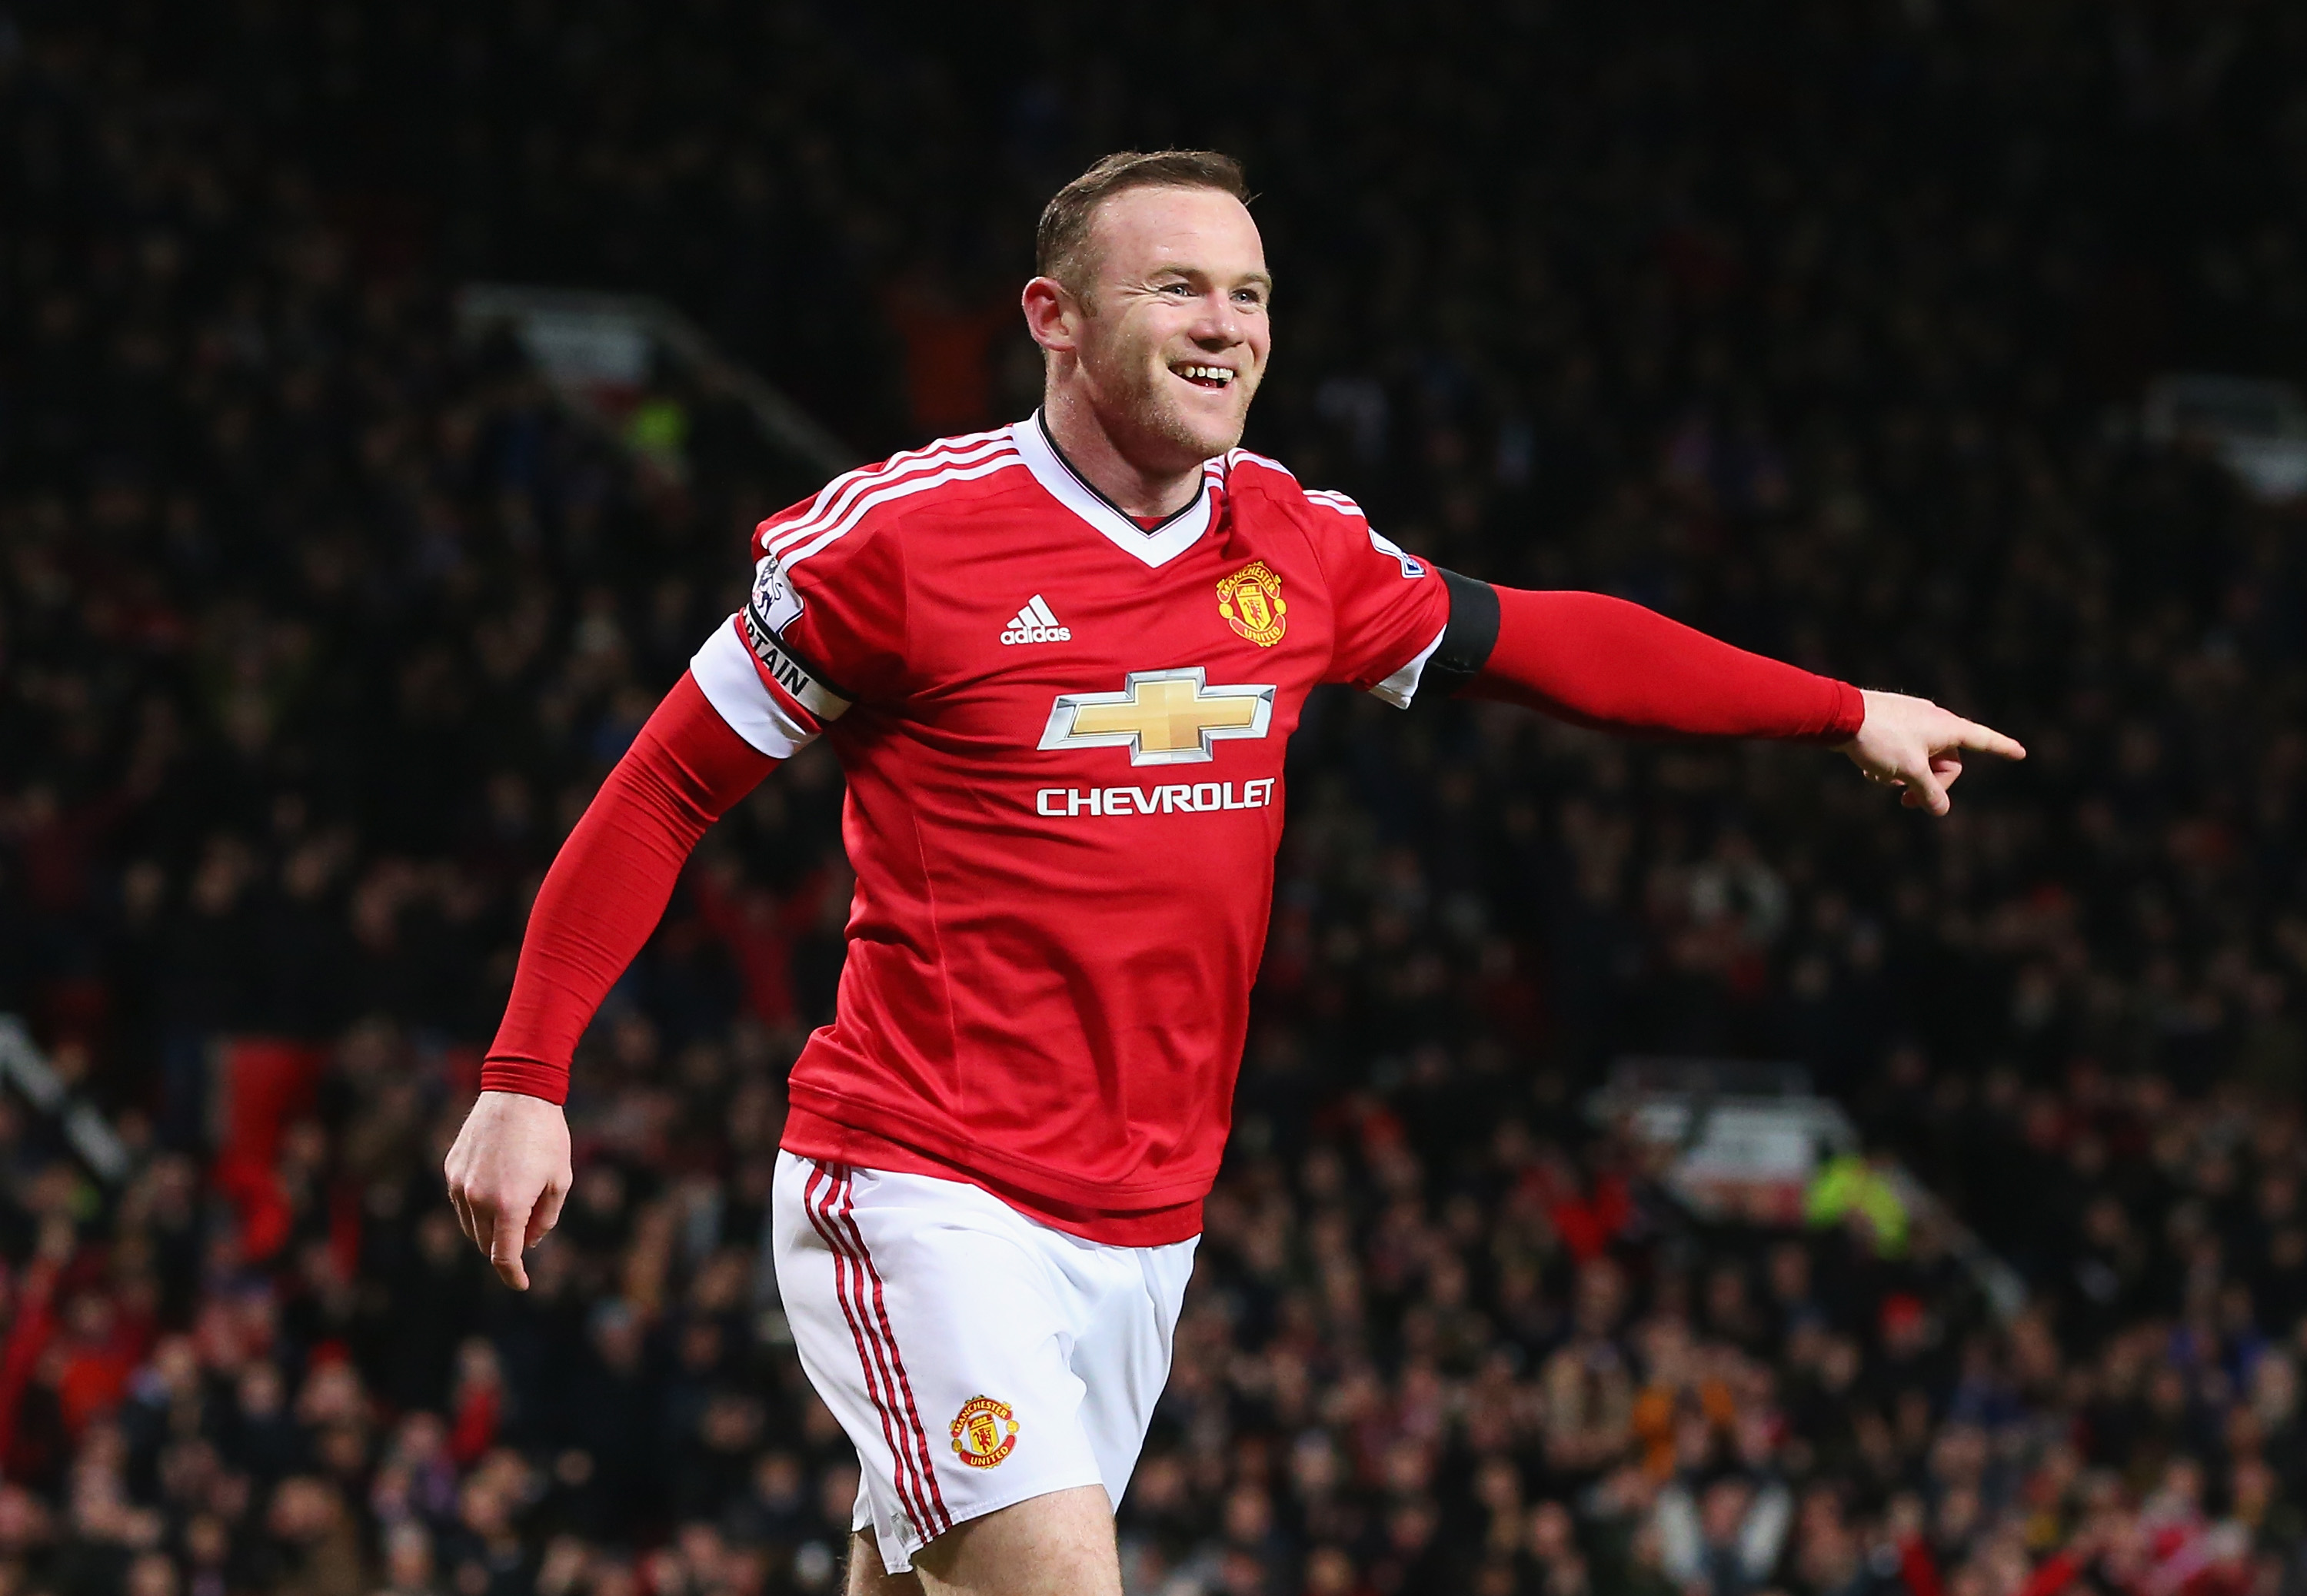 Wayne Rooney becomes United's joint all-time top scorer